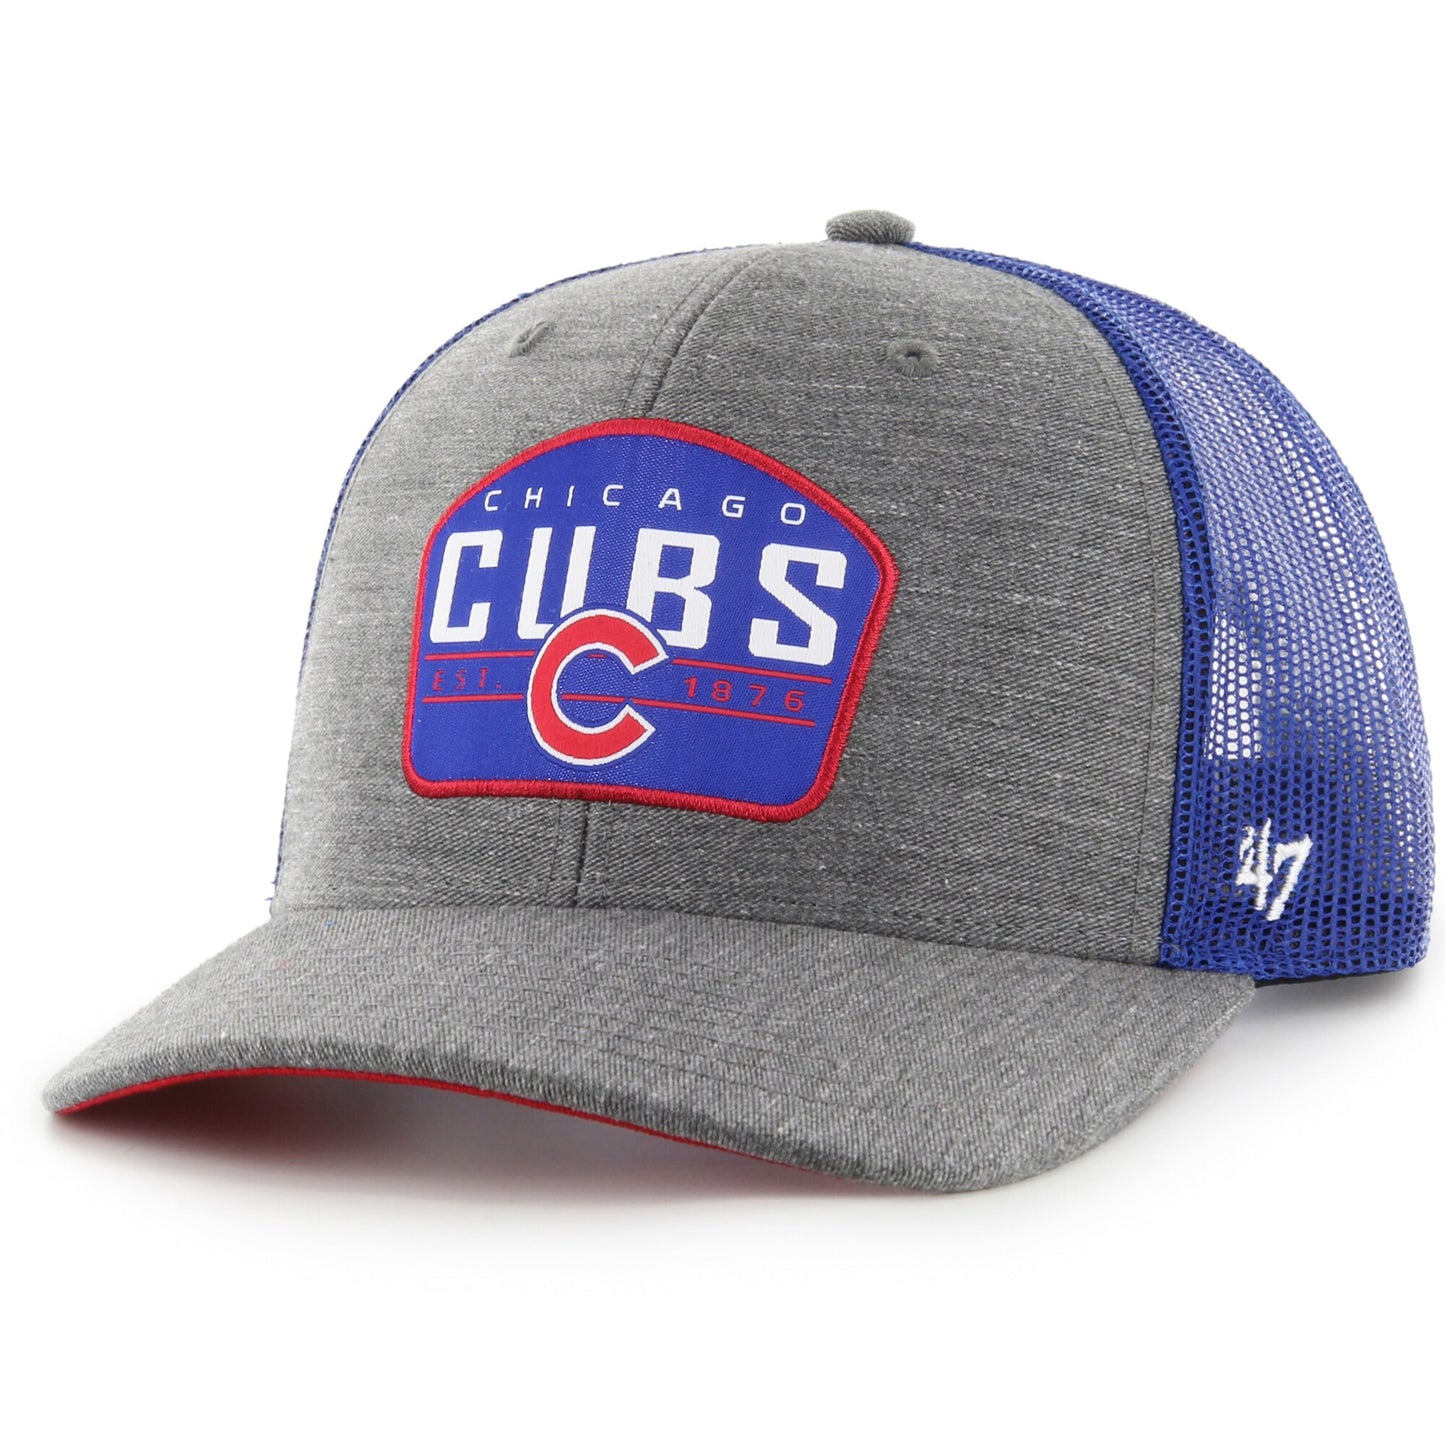 Chicago Cubs '47 Slate Trucker Snapback Hat - Charcoal